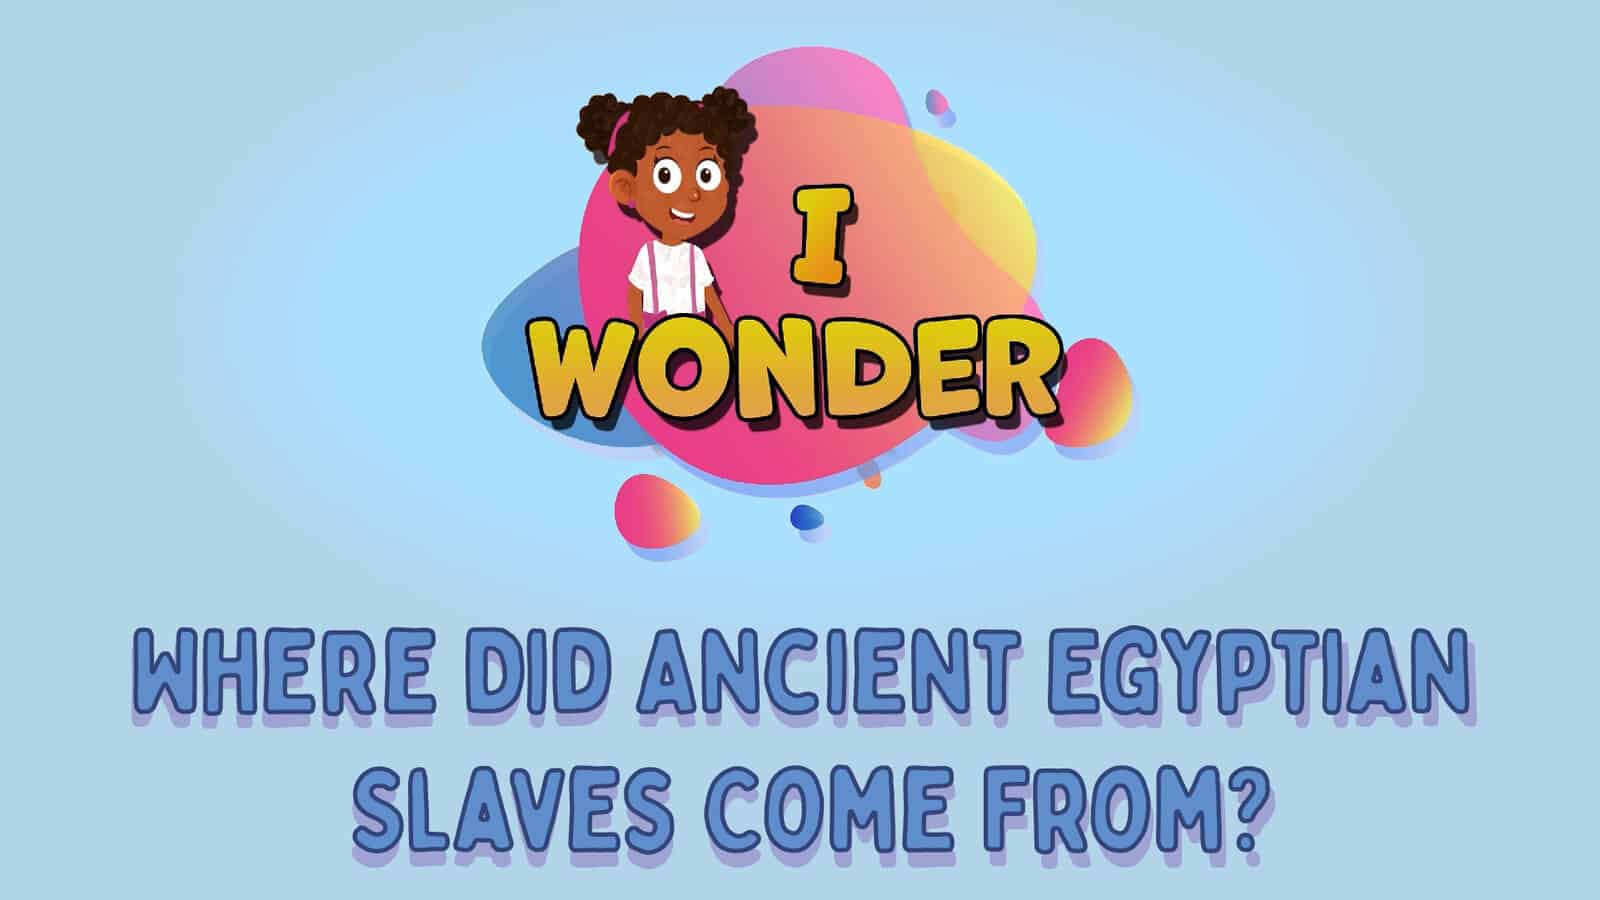 Where Did Ancient Egyptian Slaves Come From?